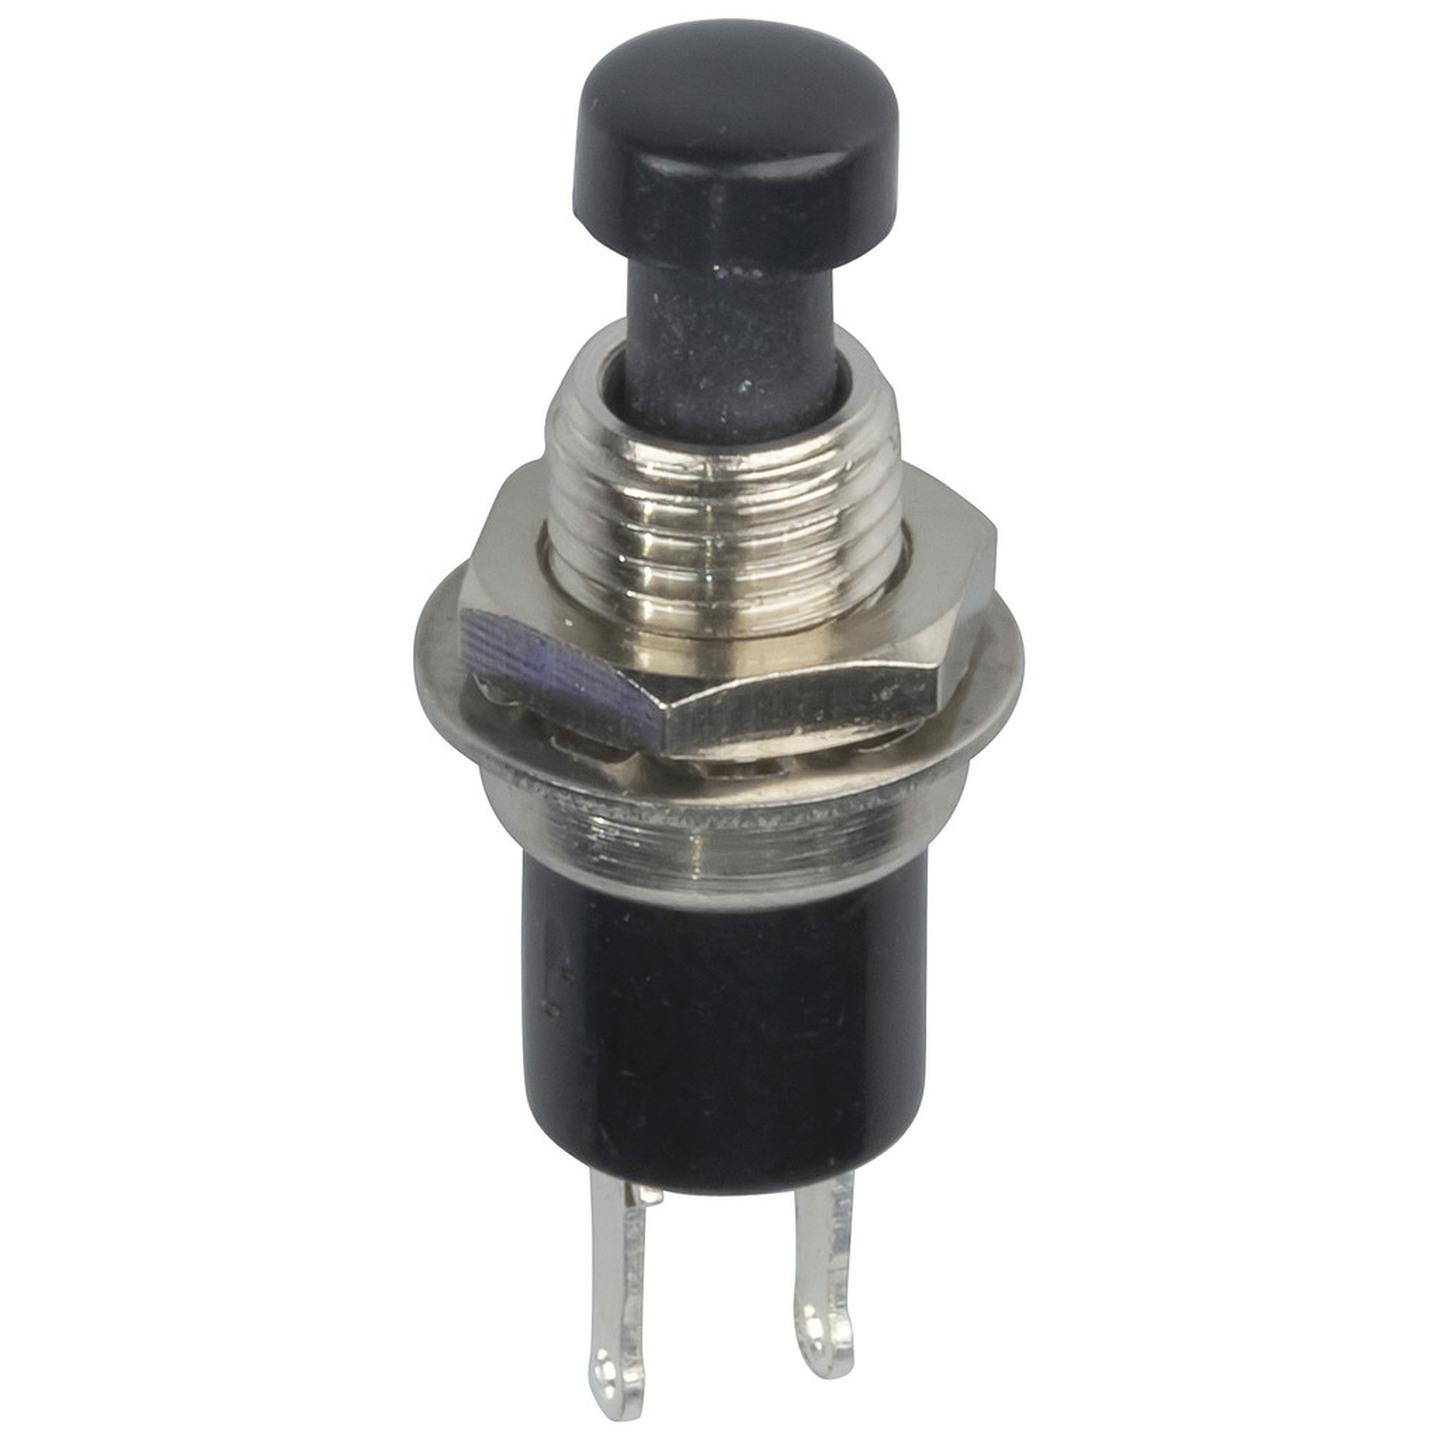 Black Miniature Pushbutton - SPST Momentary Action 125V 1A rating